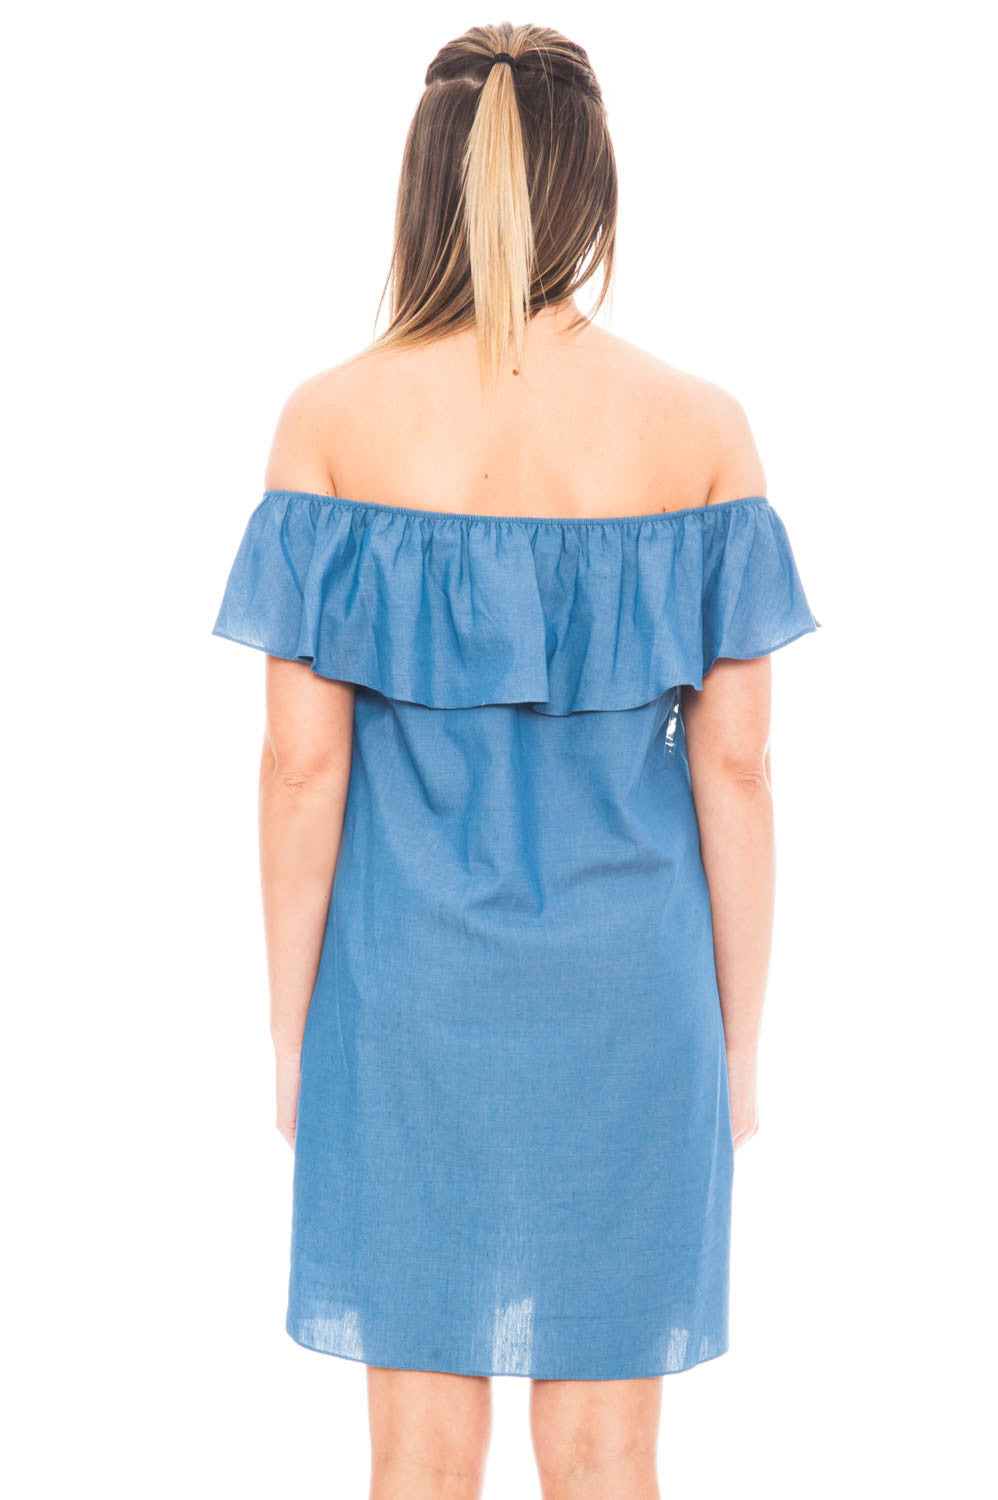 Dress - Embroidered Off Shoulder Dress by Everly